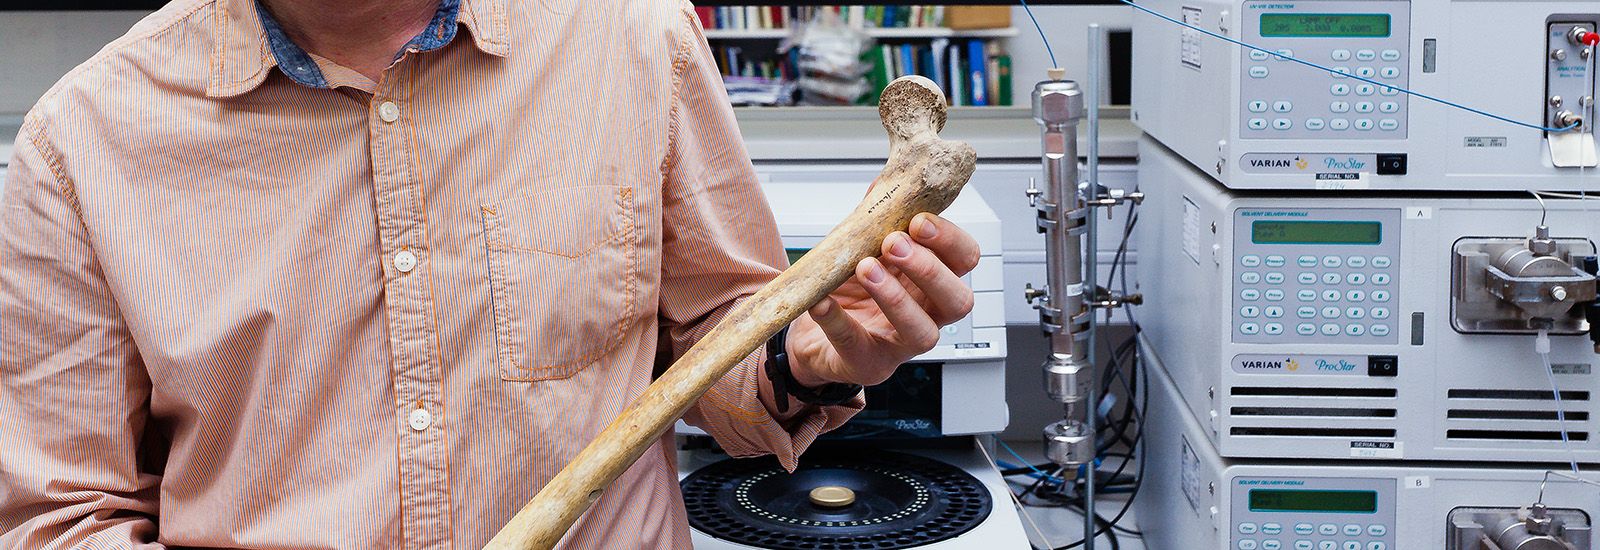 A person holding a human femur in a lab